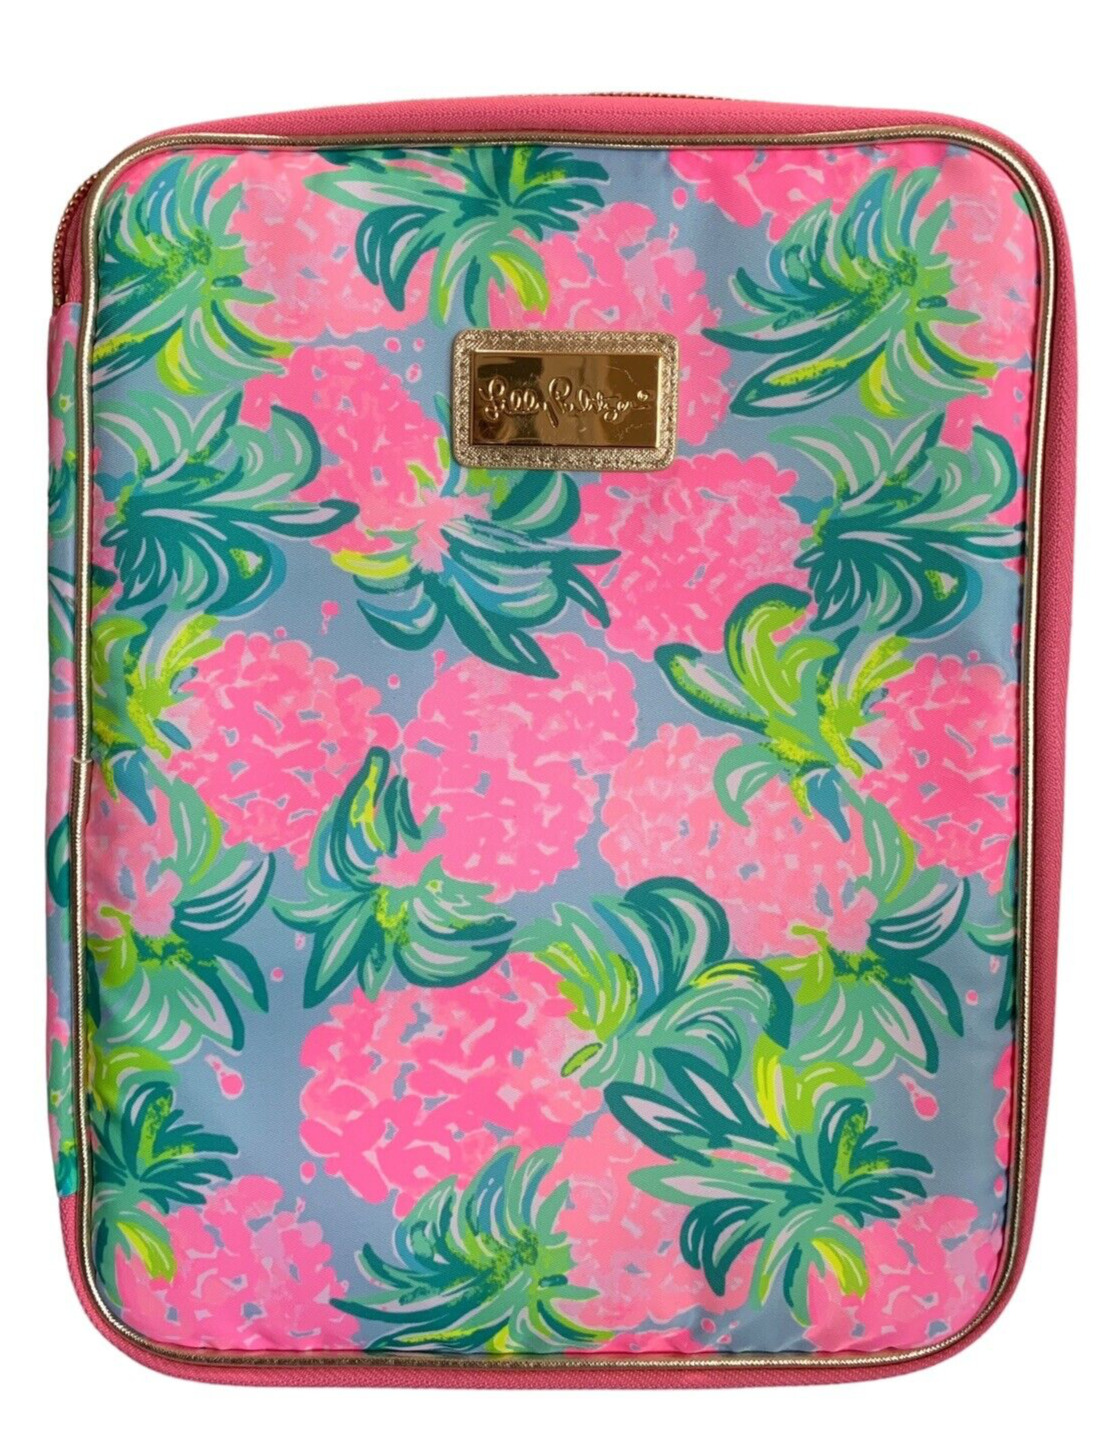 Lily Pulitzer Agenda Folio Computer Laptop Holder Bag Pink and Green